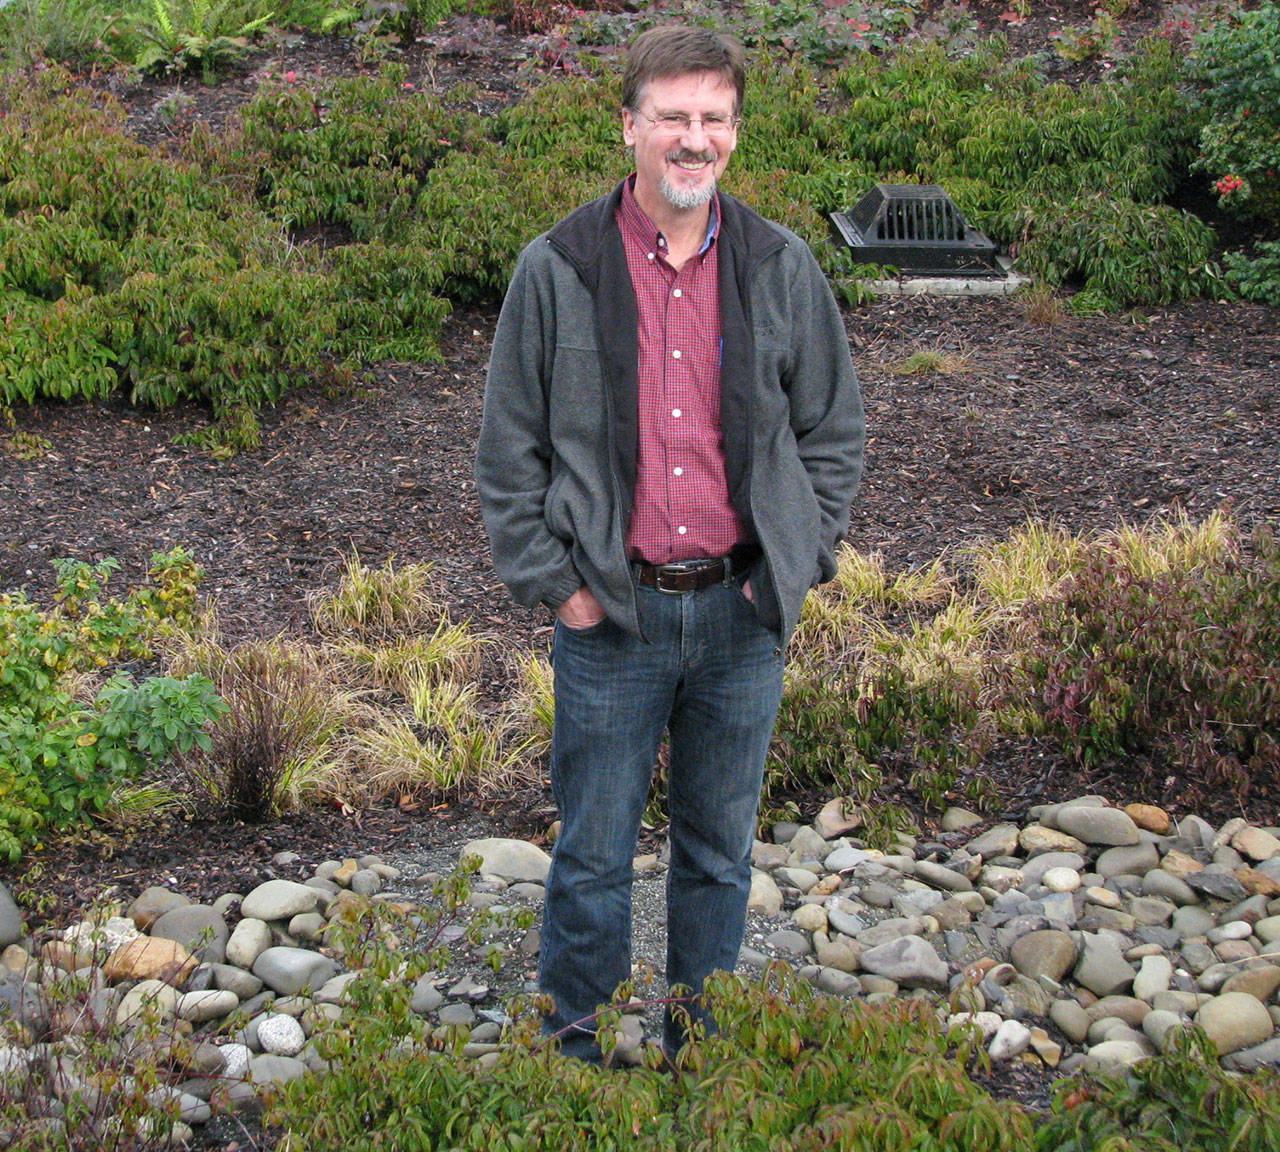 Joe Holtrop, Clallam Conservation District Executive Director, provides information about landscaping with native plants on Nov. 12, part of the Green Thumbs Garden Tips education series. Submitted photo